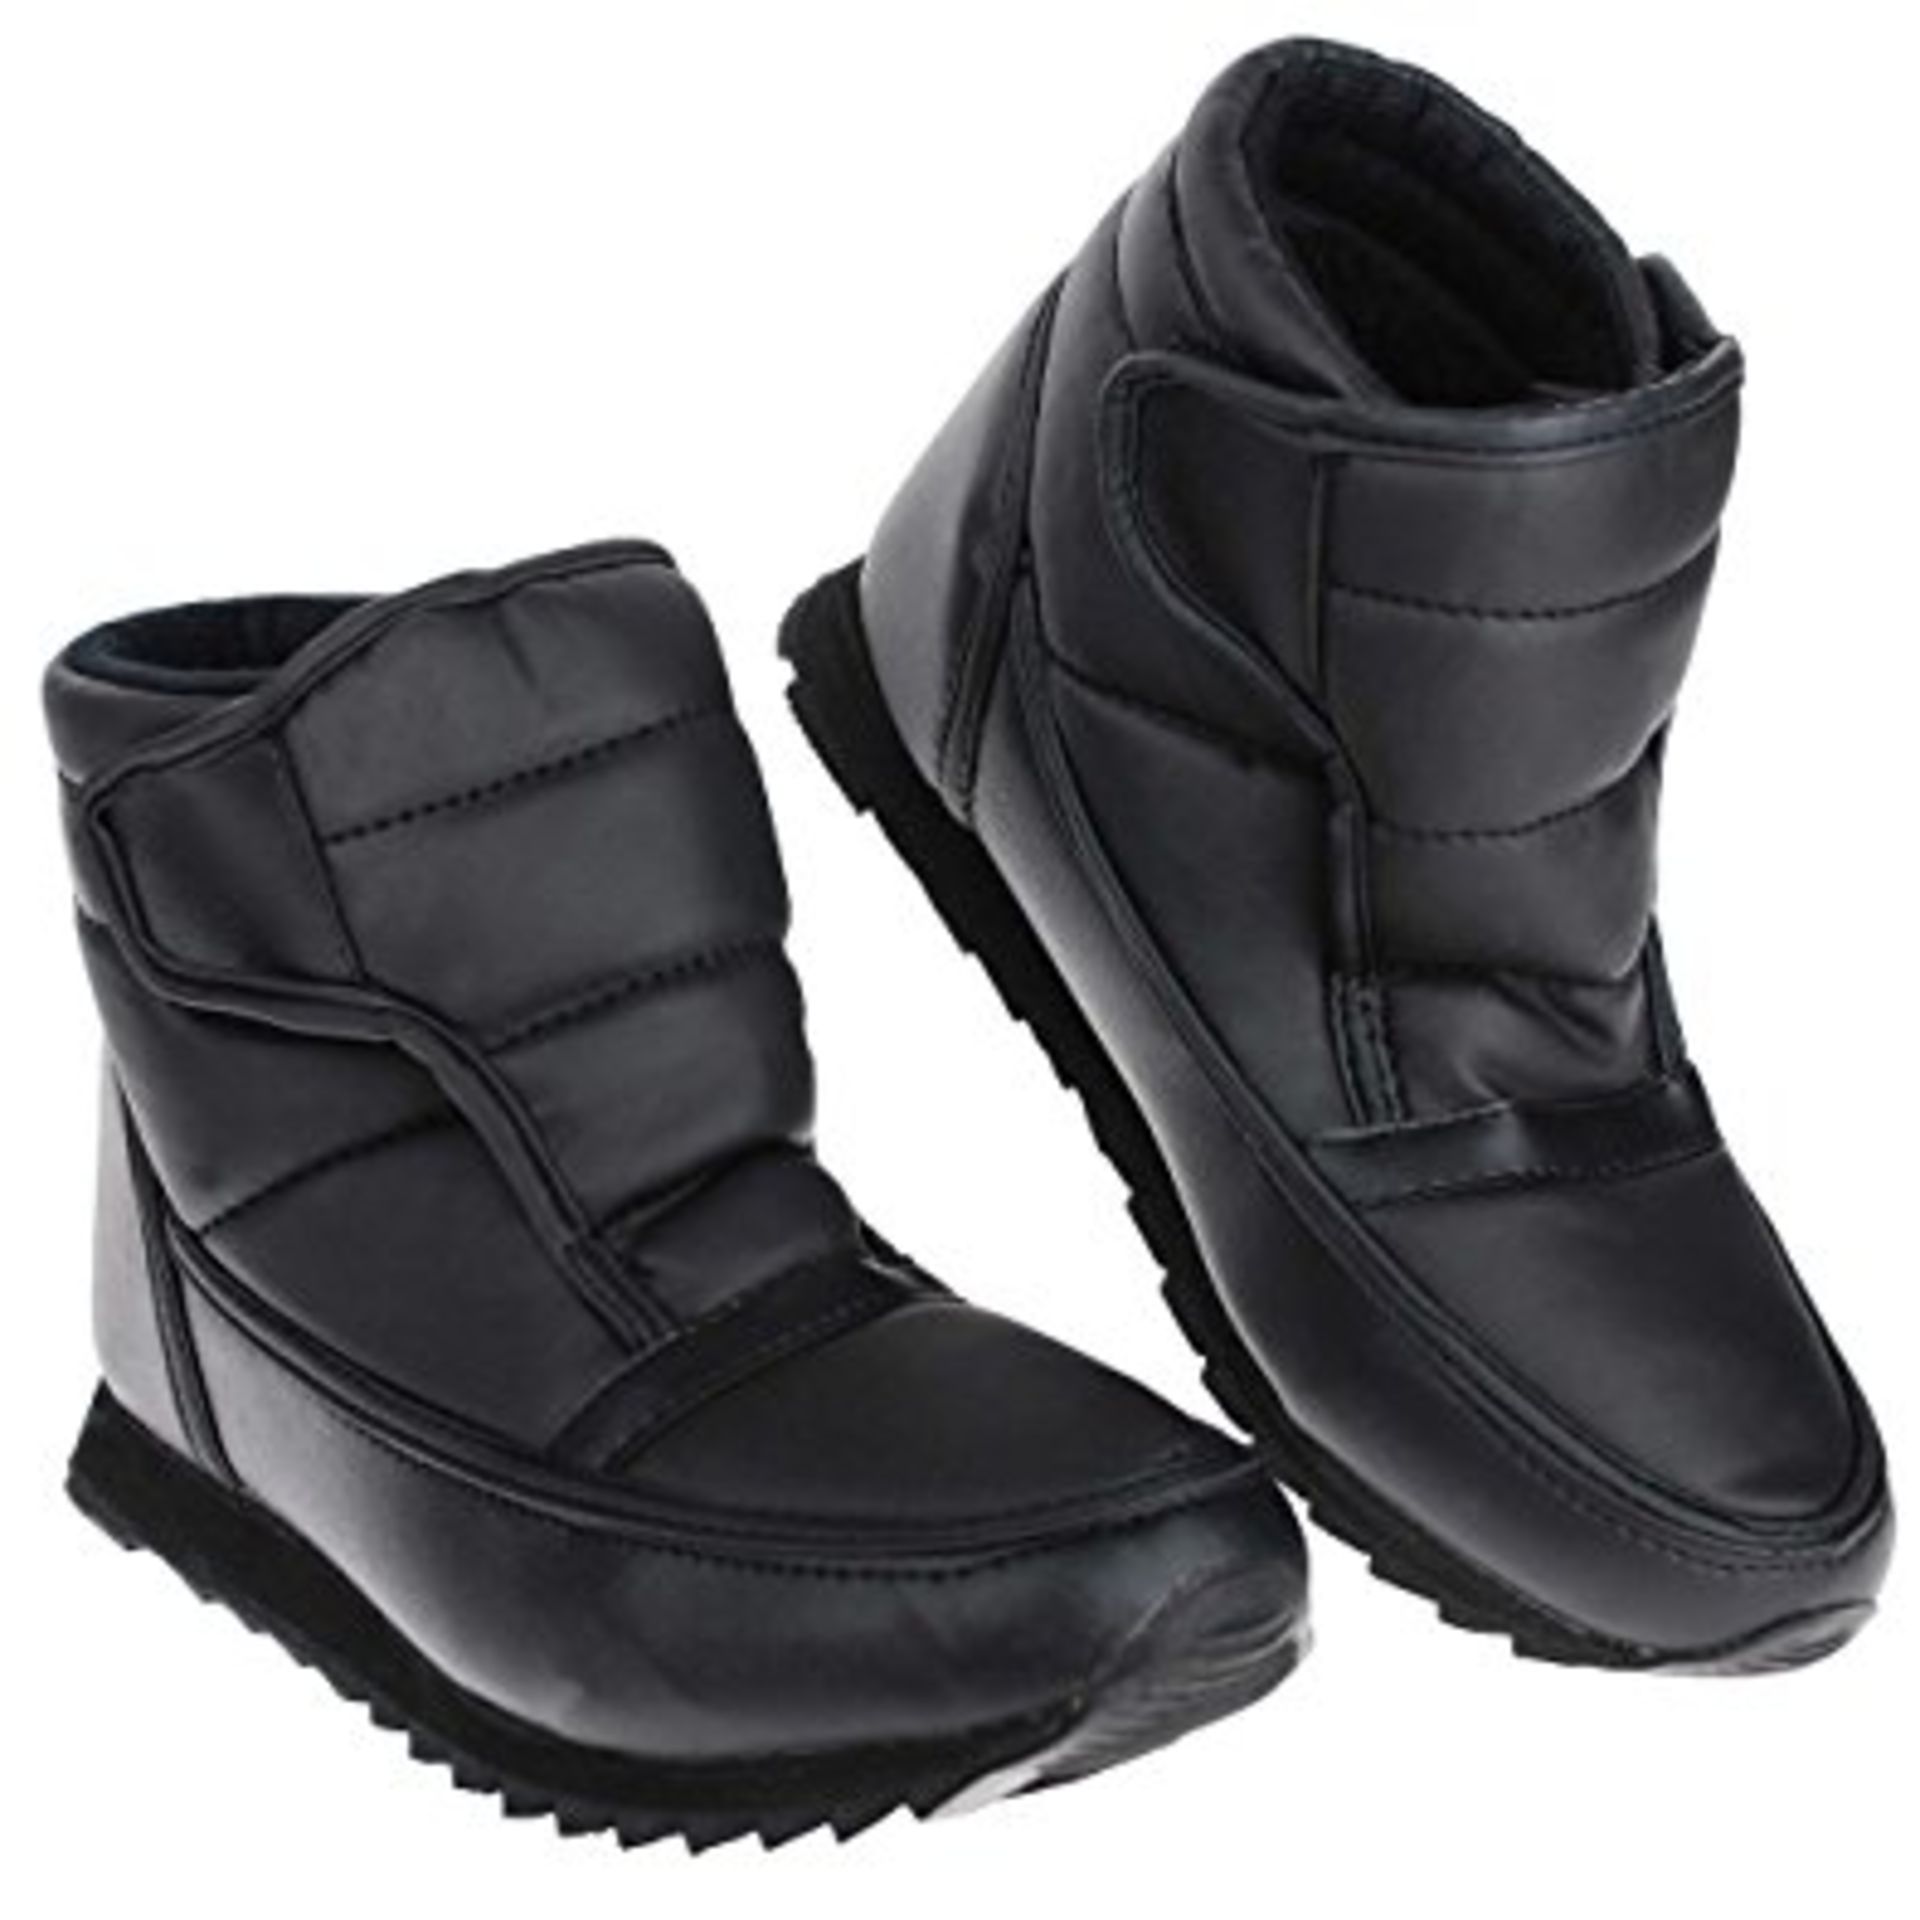 V Brand New Pair Of Black Ice Boots - Size 12